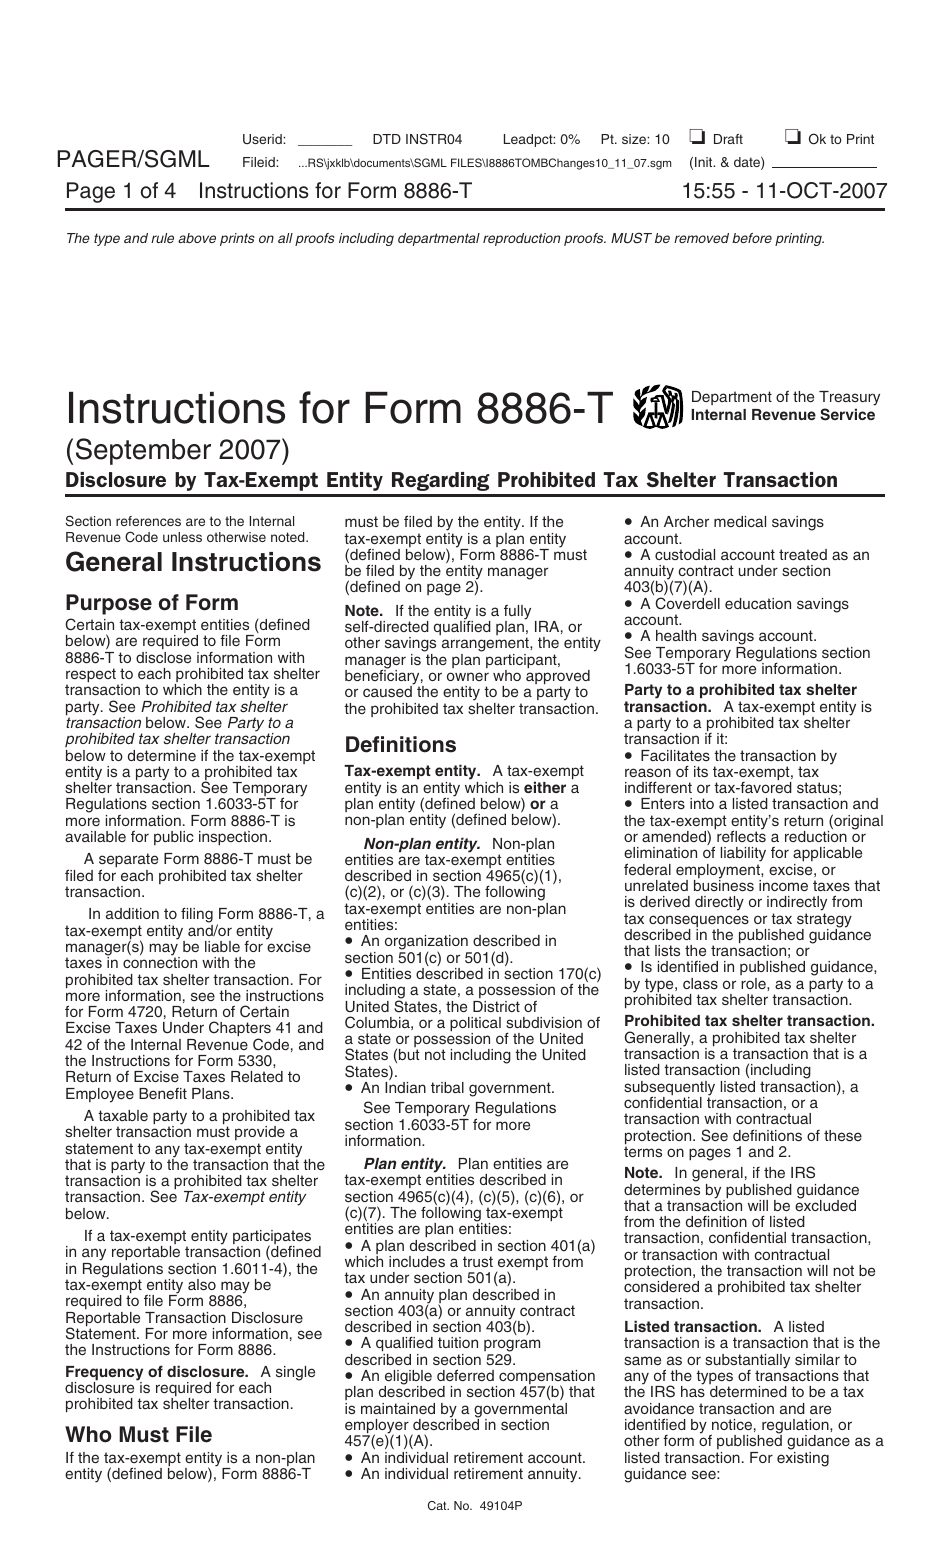 Instructions for IRS Form 8886-T Disclosure by Tax-Exempt Entity Regarding Prohibited Tax Shelter Transaction, Page 1